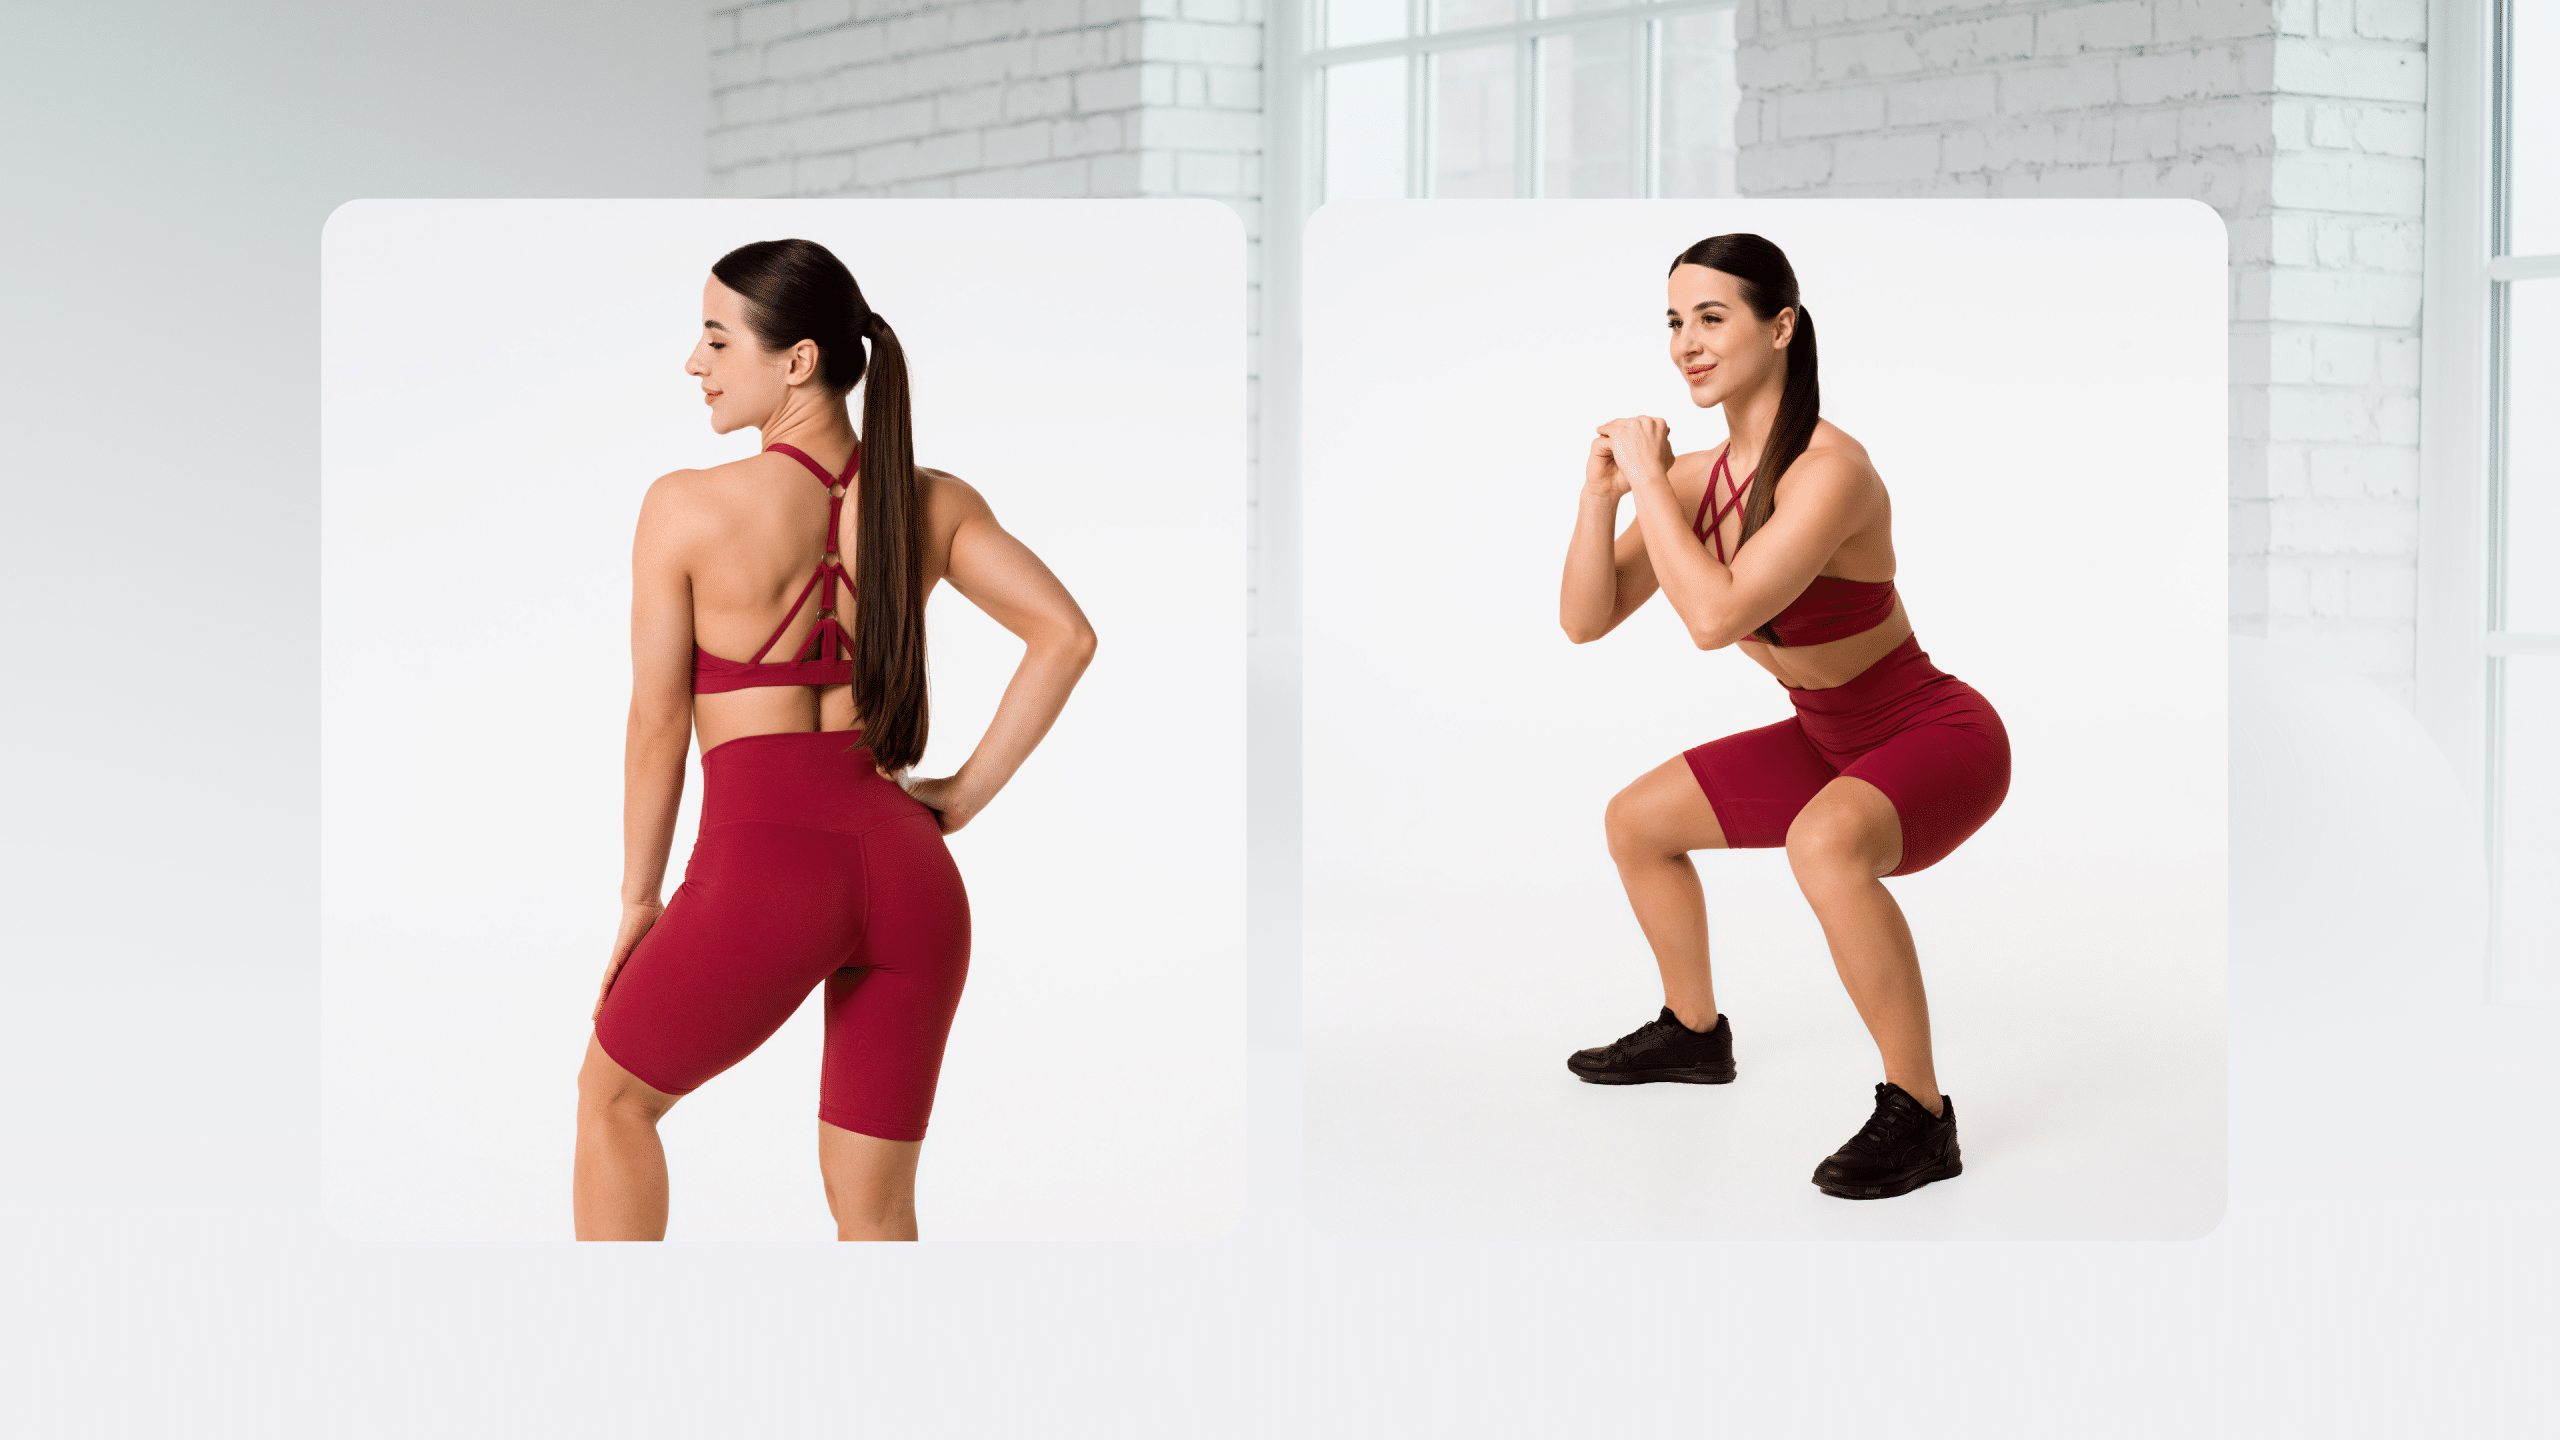 The Lazy People's 3 Top Exercises for Lean Arms and a Toned Back.